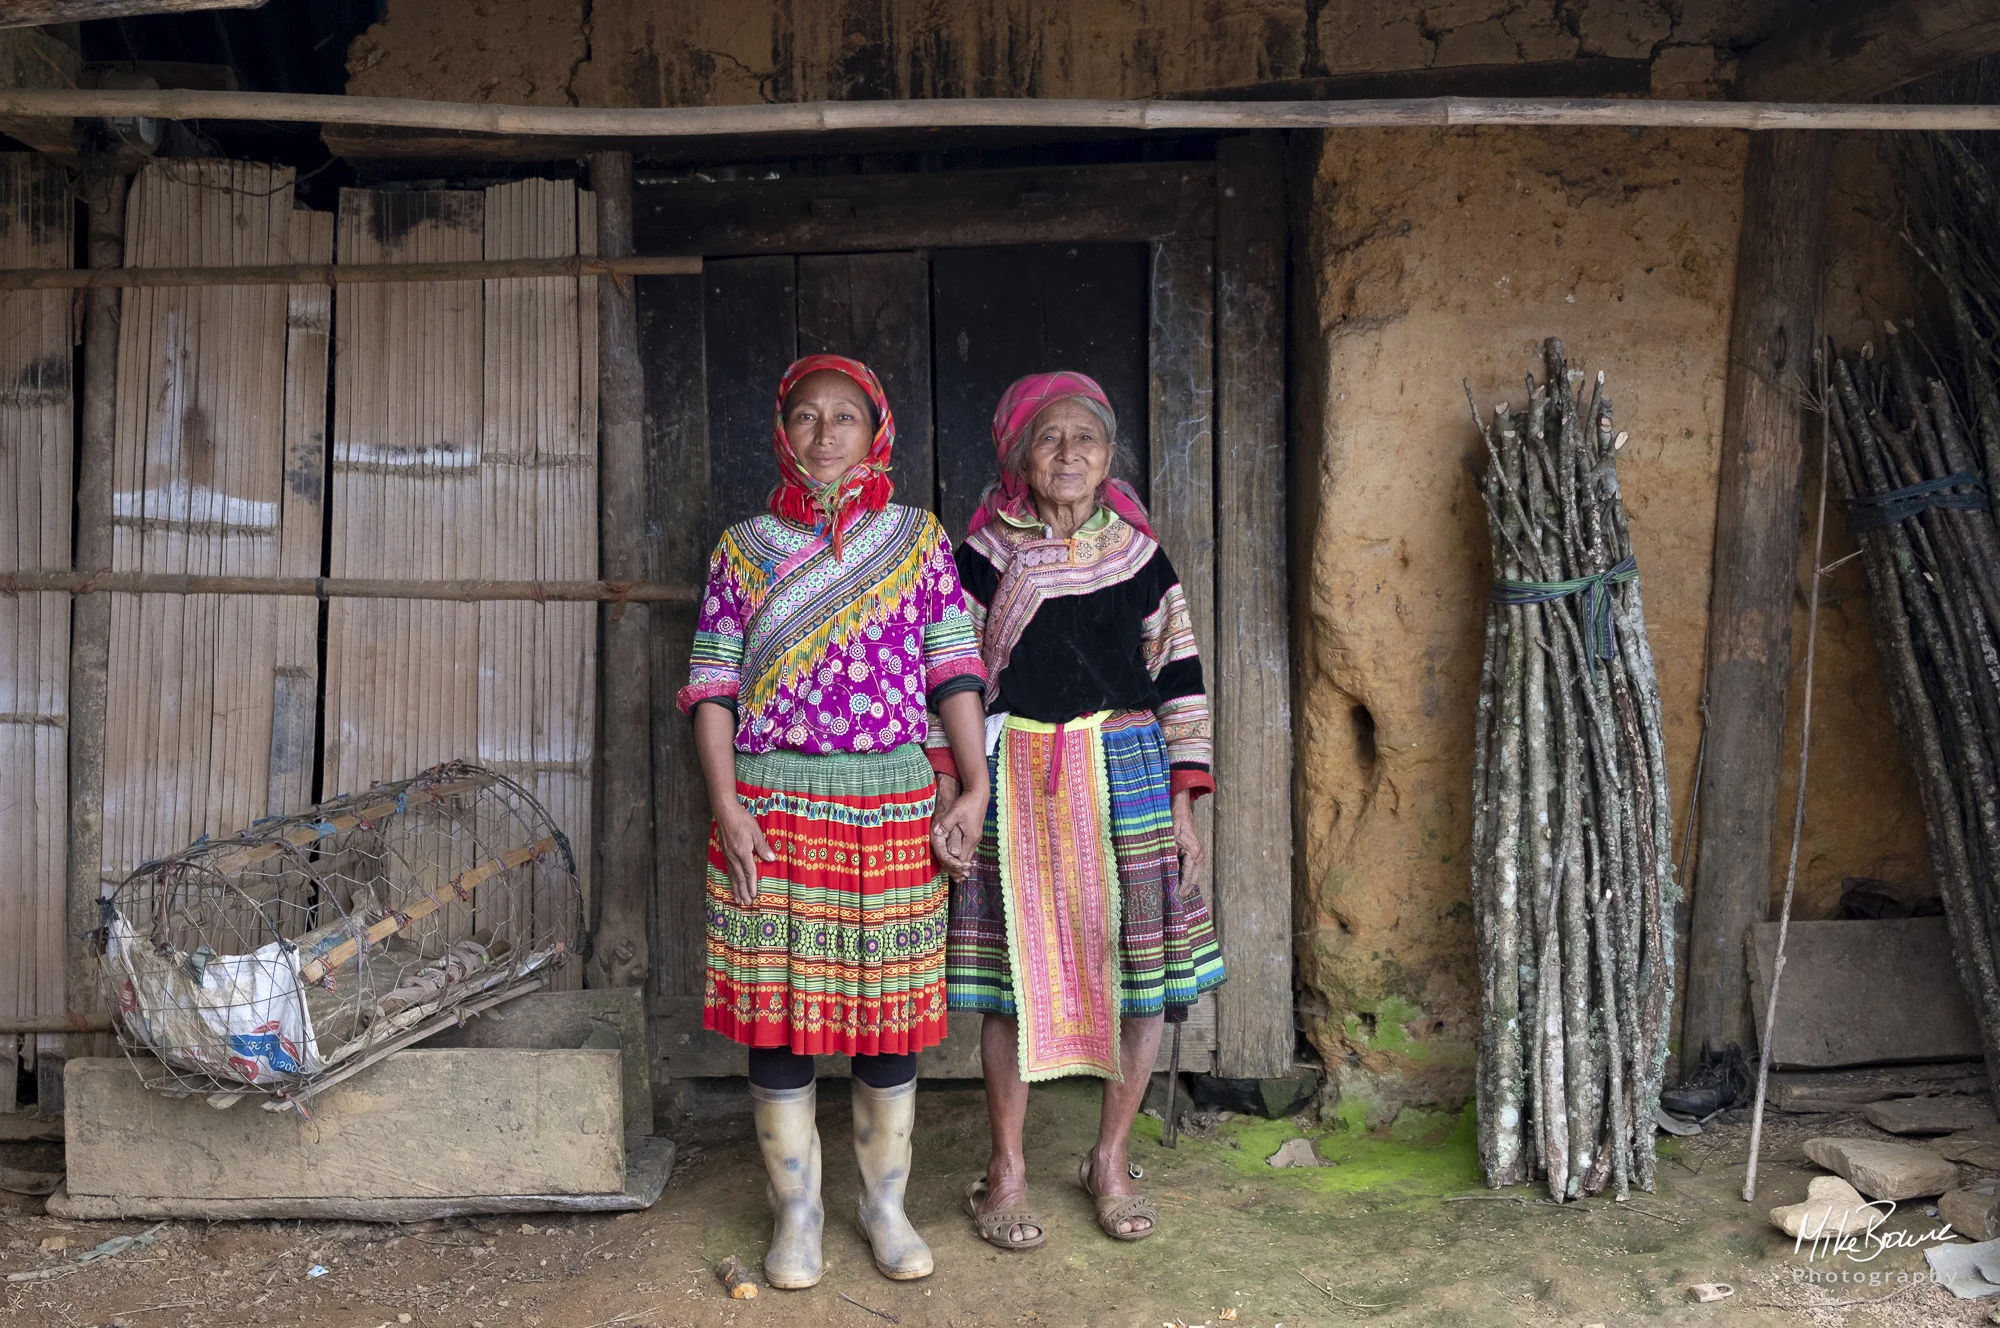 Hmong Mother and daughter, chicken cage and bundle of wood by front door of a house in Hoàng Su Phì, Vietnam